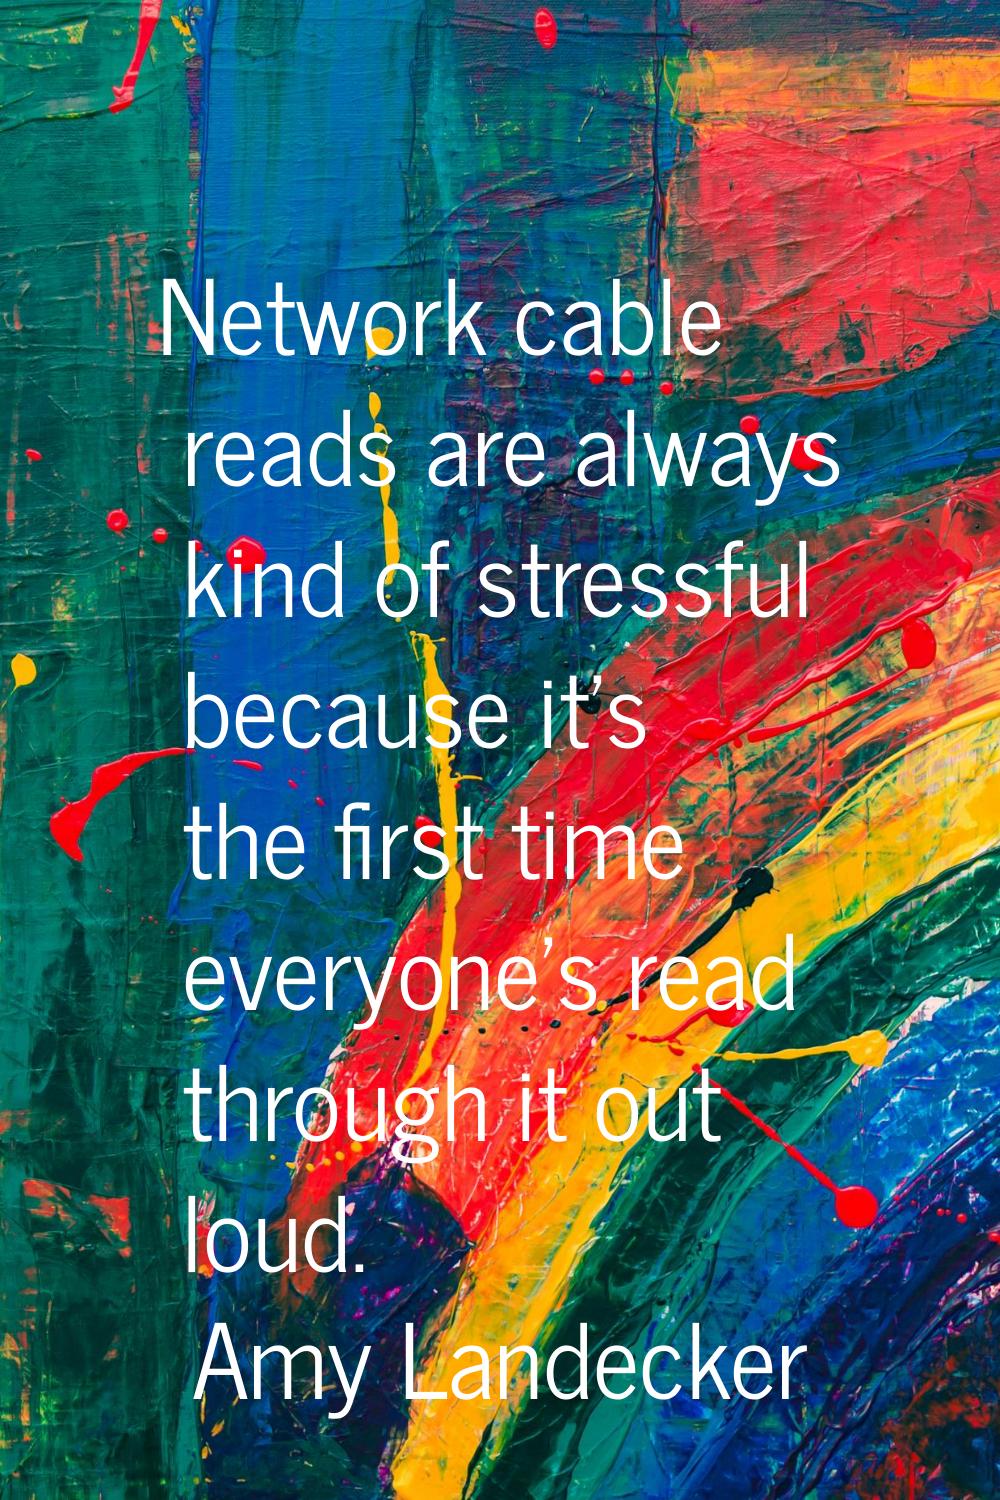 Network cable reads are always kind of stressful because it's the first time everyone's read throug